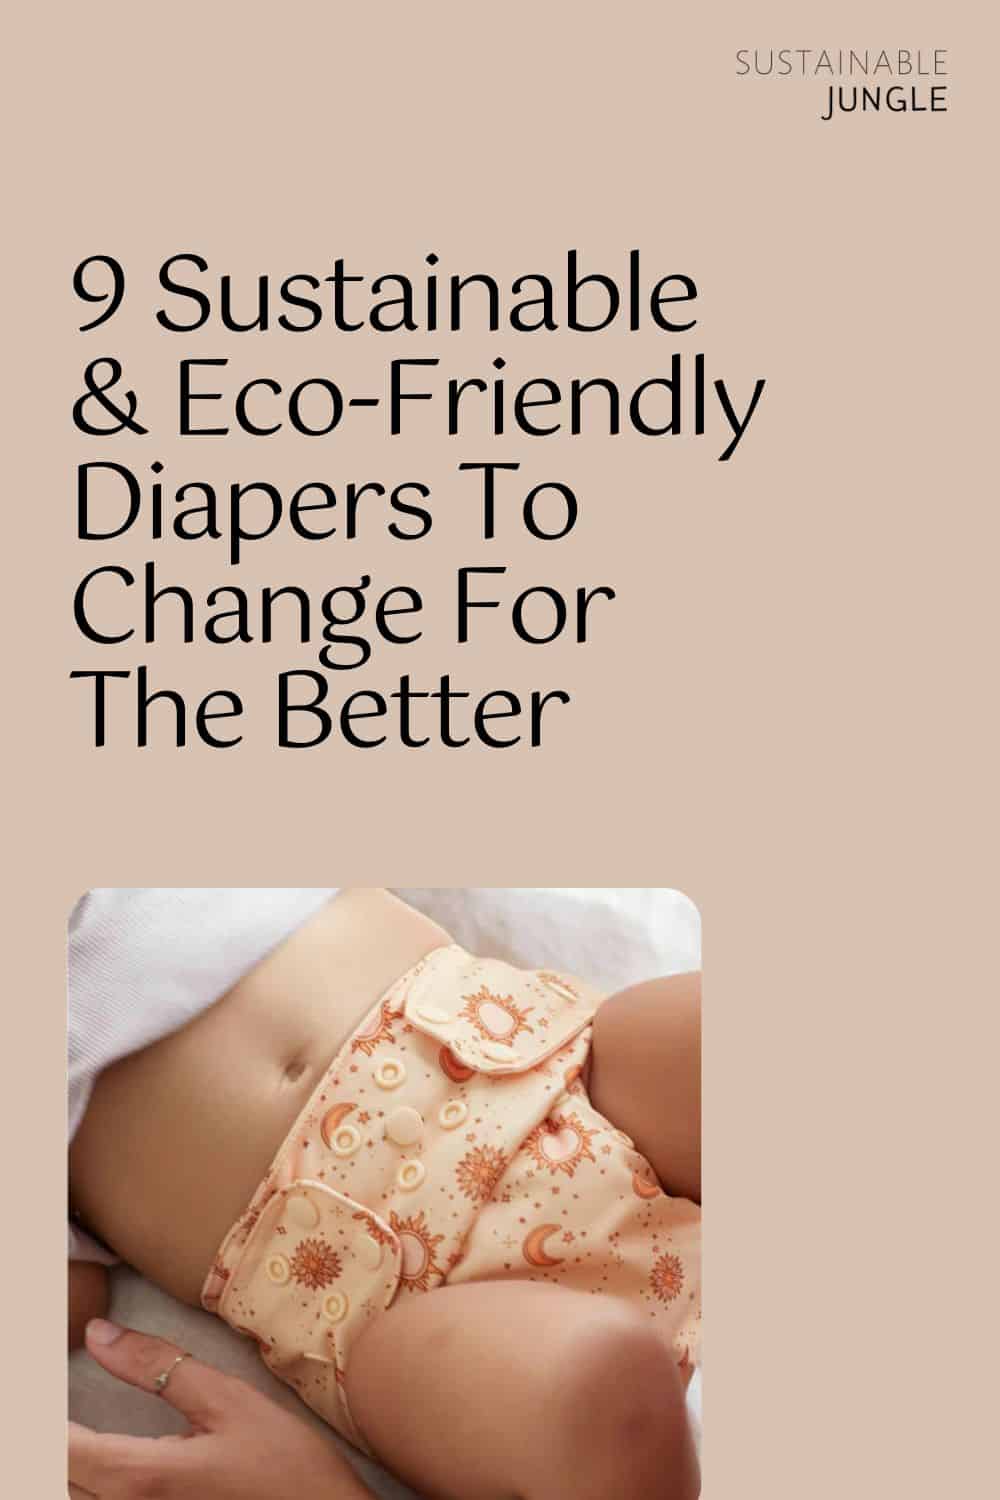 9 Sustainable & Eco-Friendly Diapers To Change For The Better Image by Ecoriginals #ecofriendlydiapers #ecofriendlybabydiapers #bestecofriendlydiapers #ecofriendlydisposablediapers #sustainablediapers #sustainabledisposablediapers #sustainablejungle